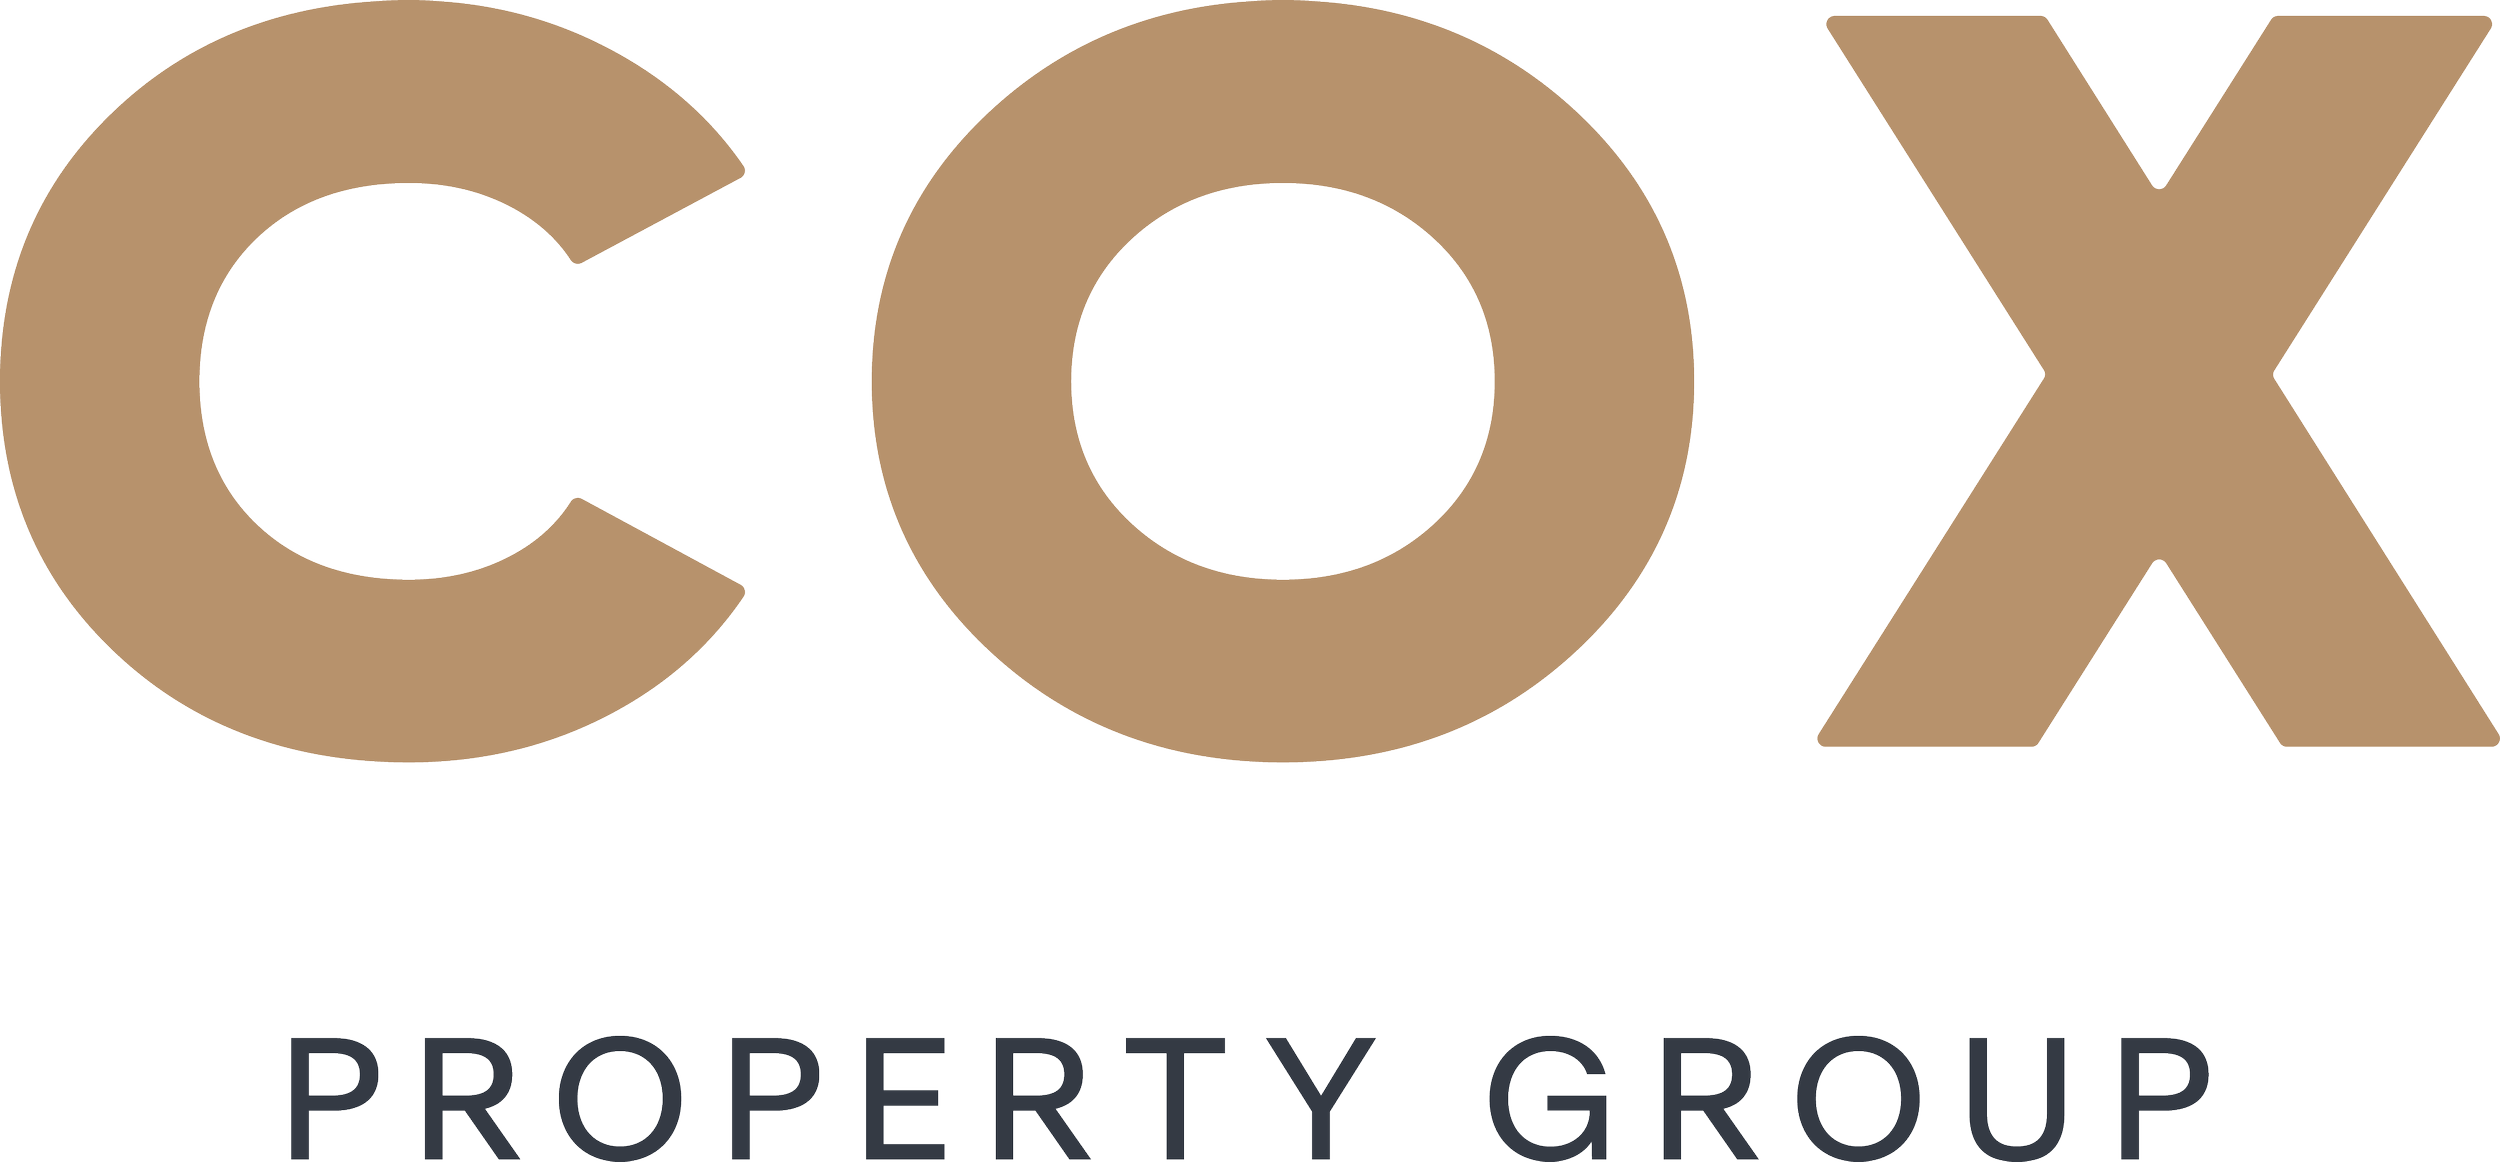 Cox Property Group